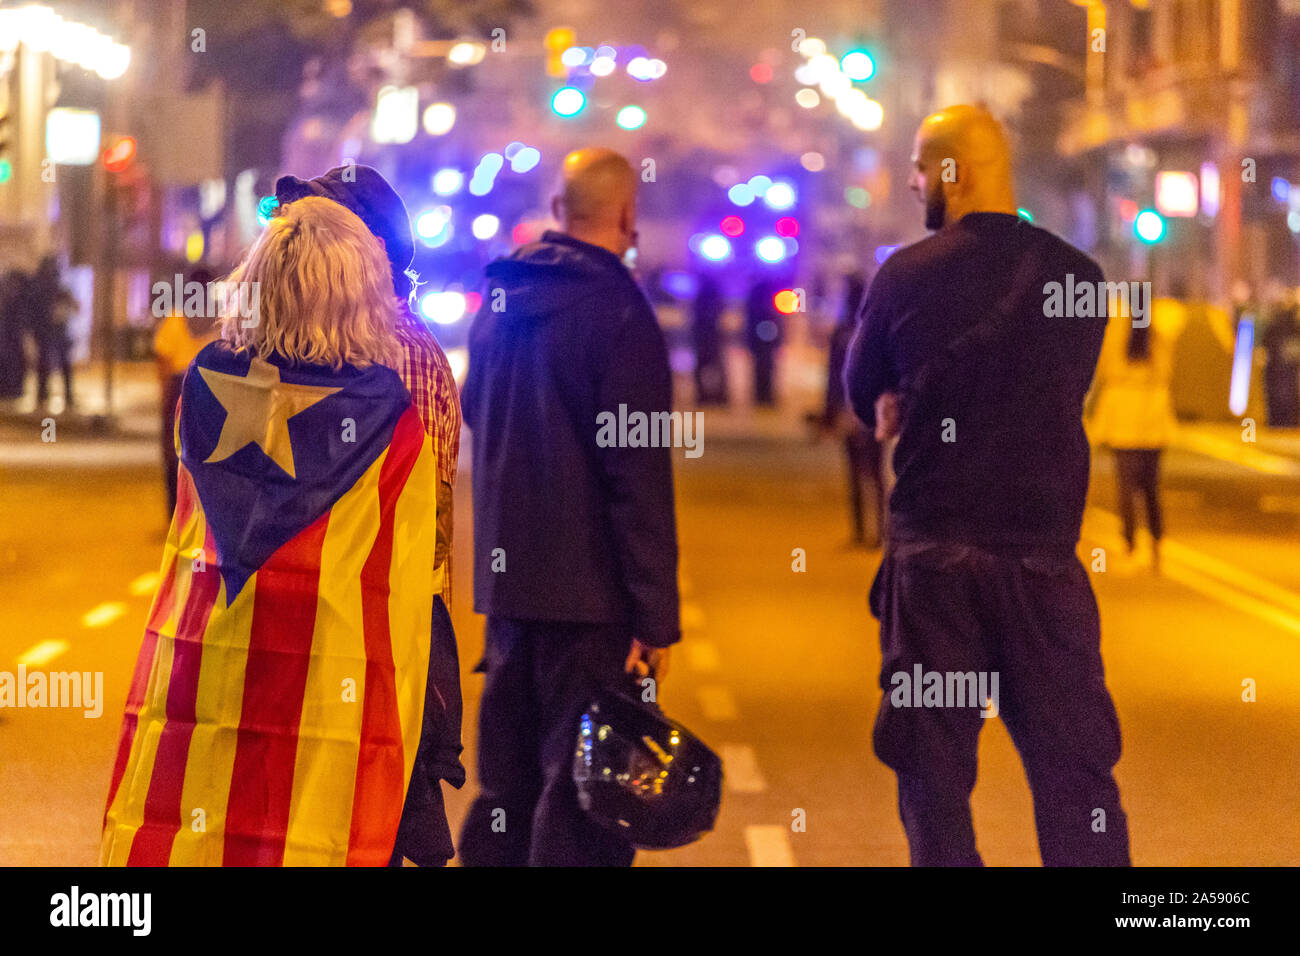 Barcelona, Spain - October 18, 2019: Protesters in Barcelona demand release of jailed Catalan leaders Credit: Dino Geromella/Alamy Live News Stock Photo